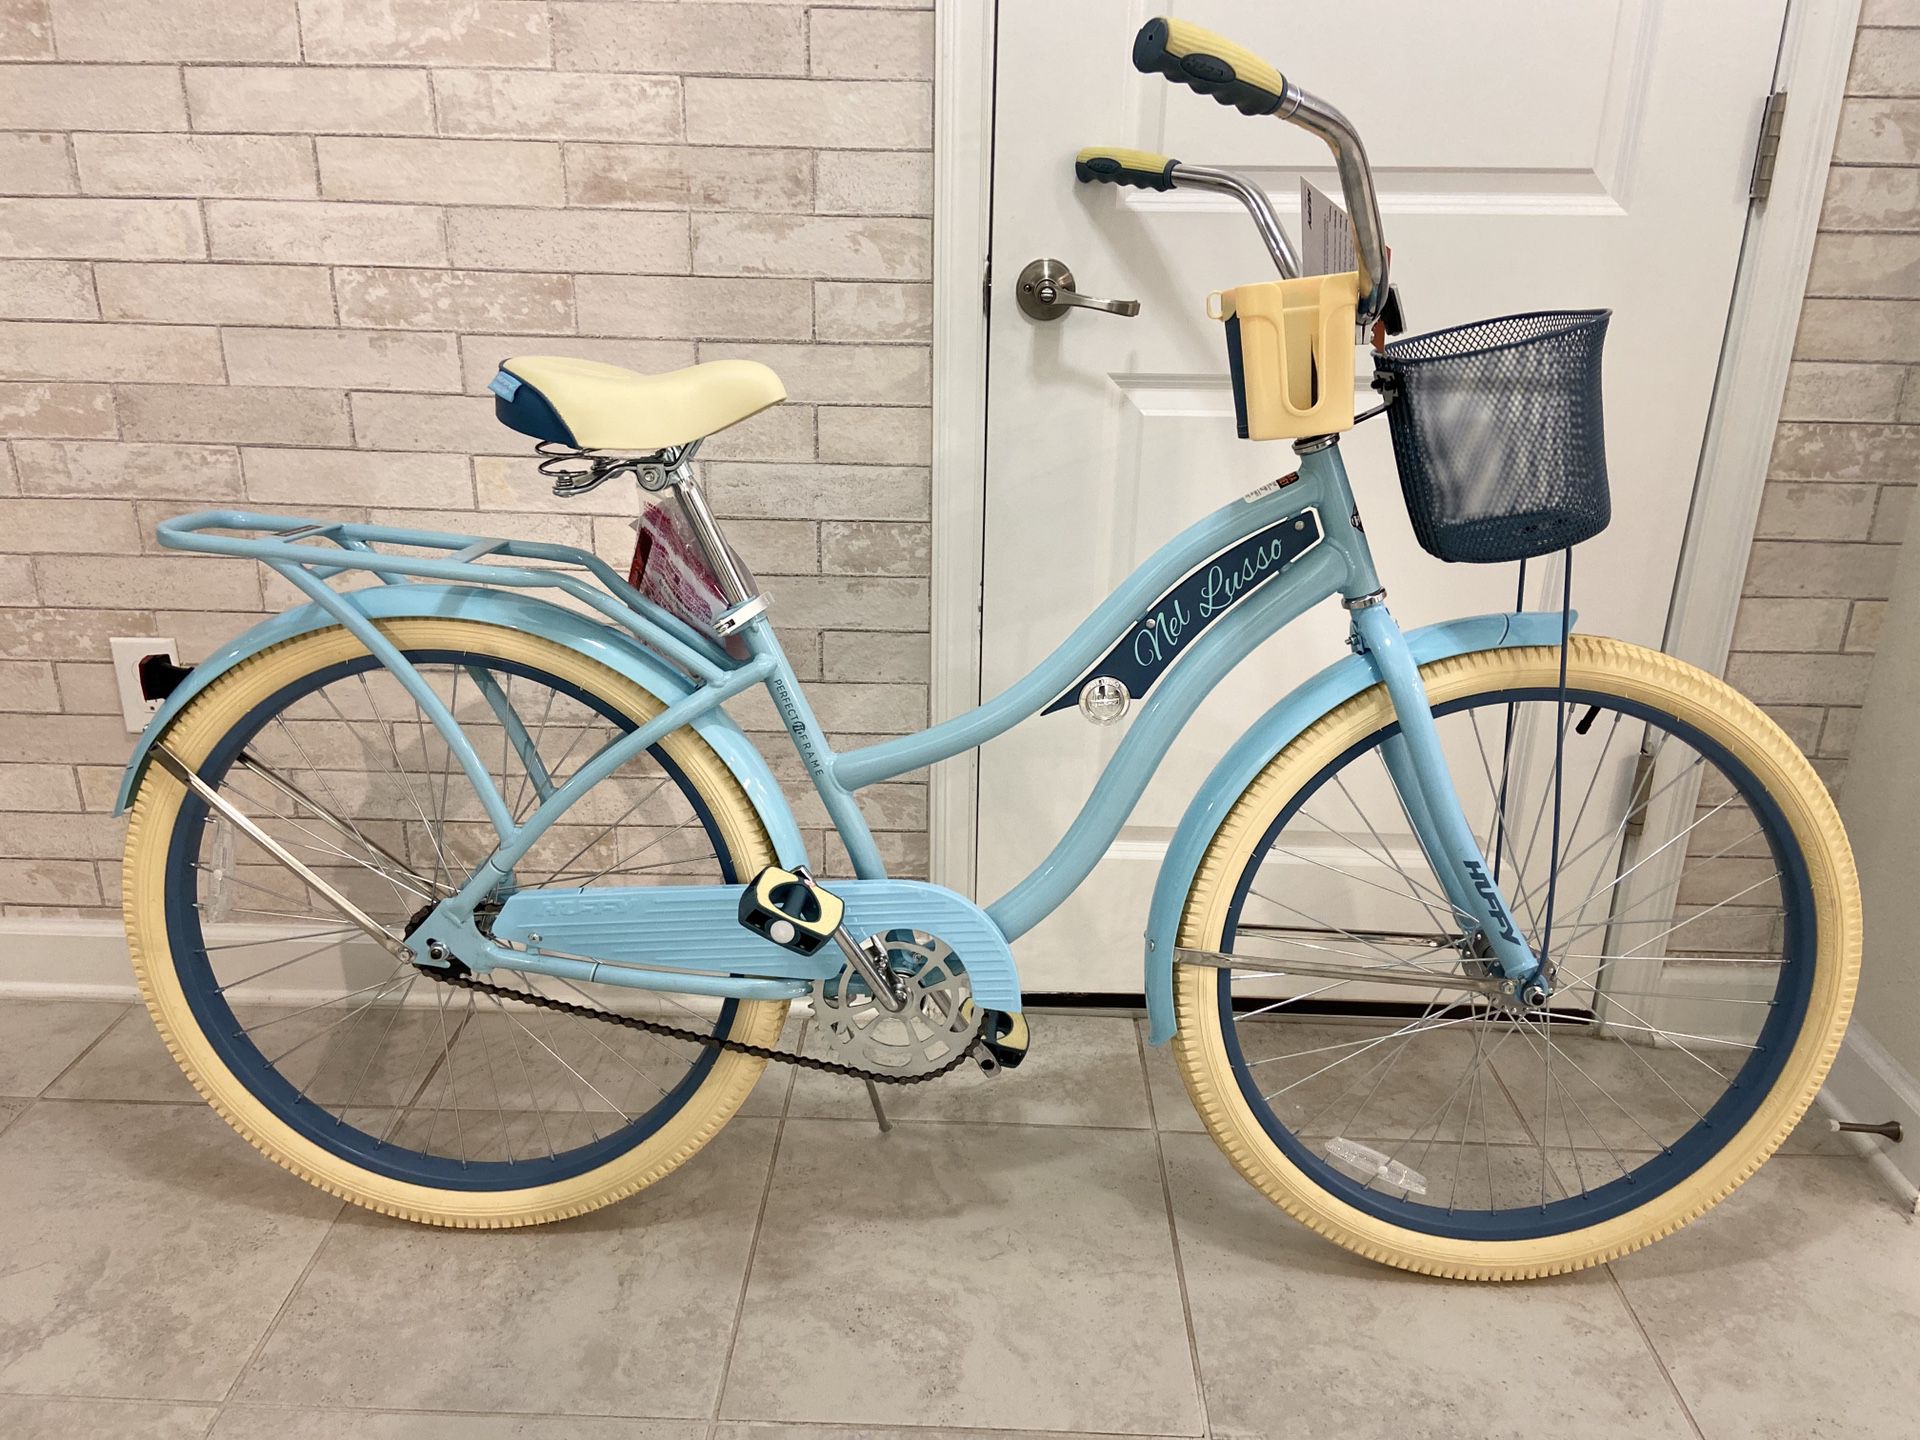 Special Edition women’s Cruiser 26” for riders 5’2 to 5’10 height, gorgeous baby blue color!